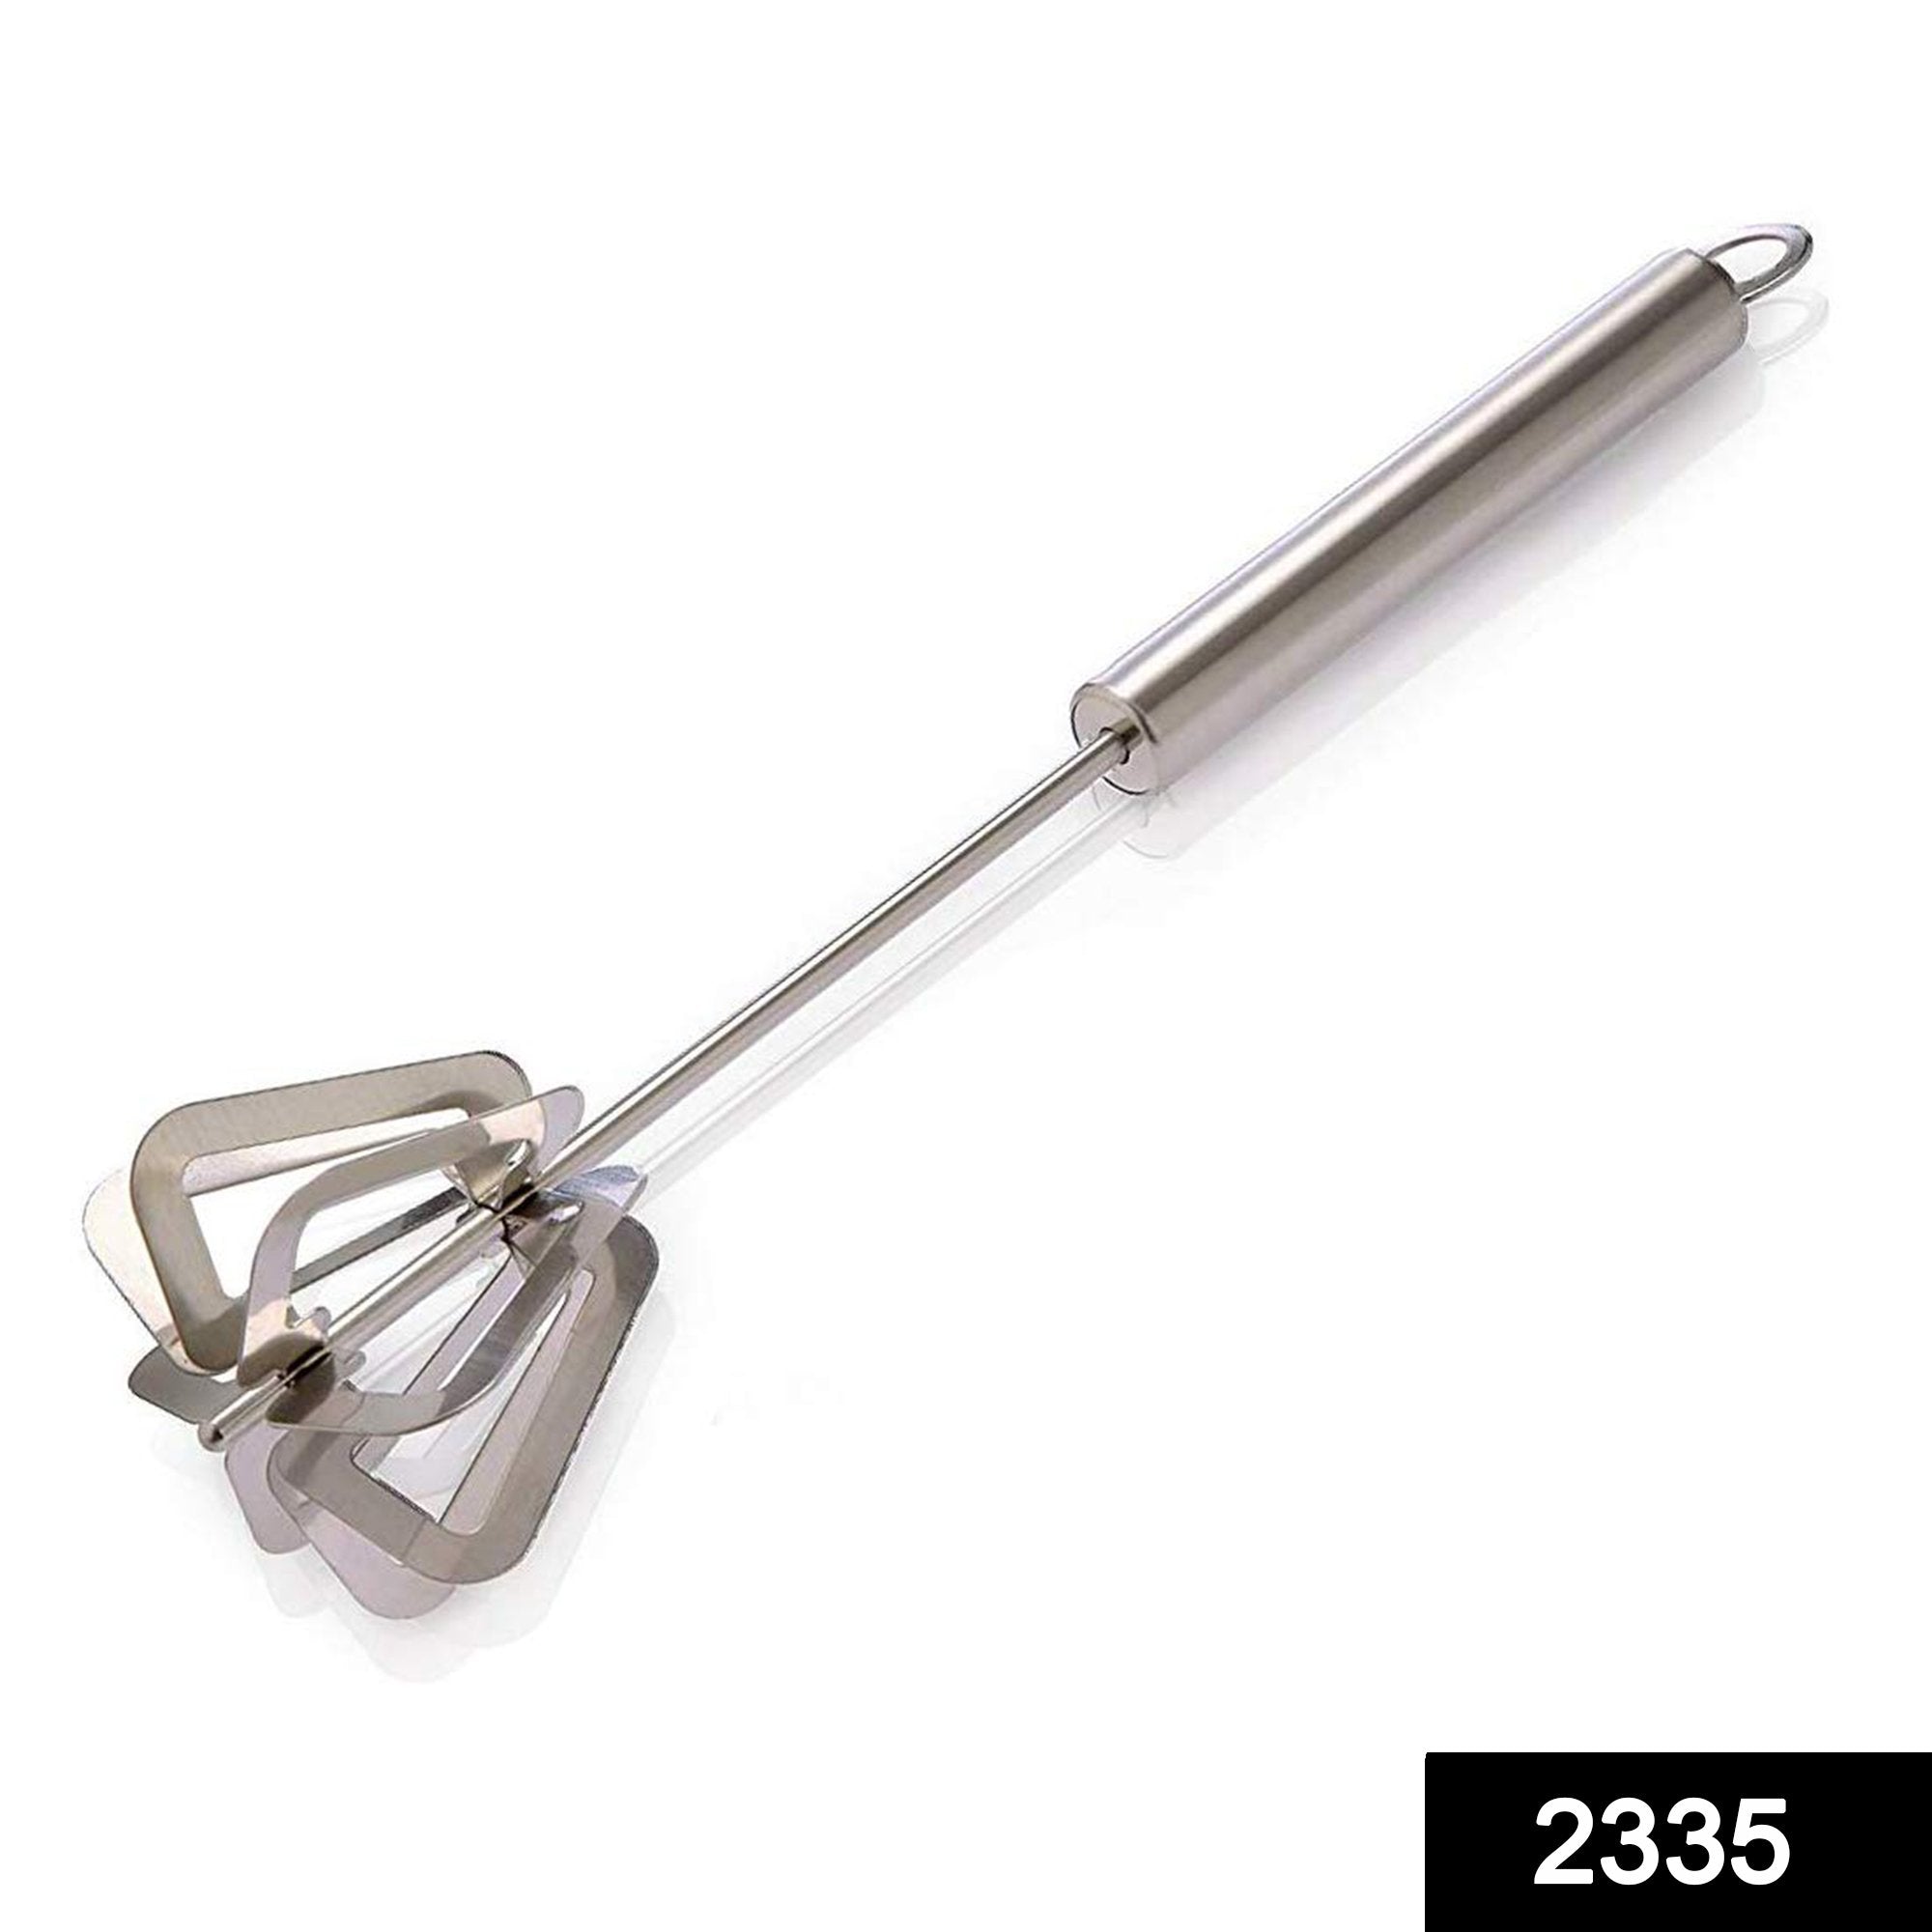 2335 Stainless Steel Manual Mixi, Hand Blender - SkyShopy